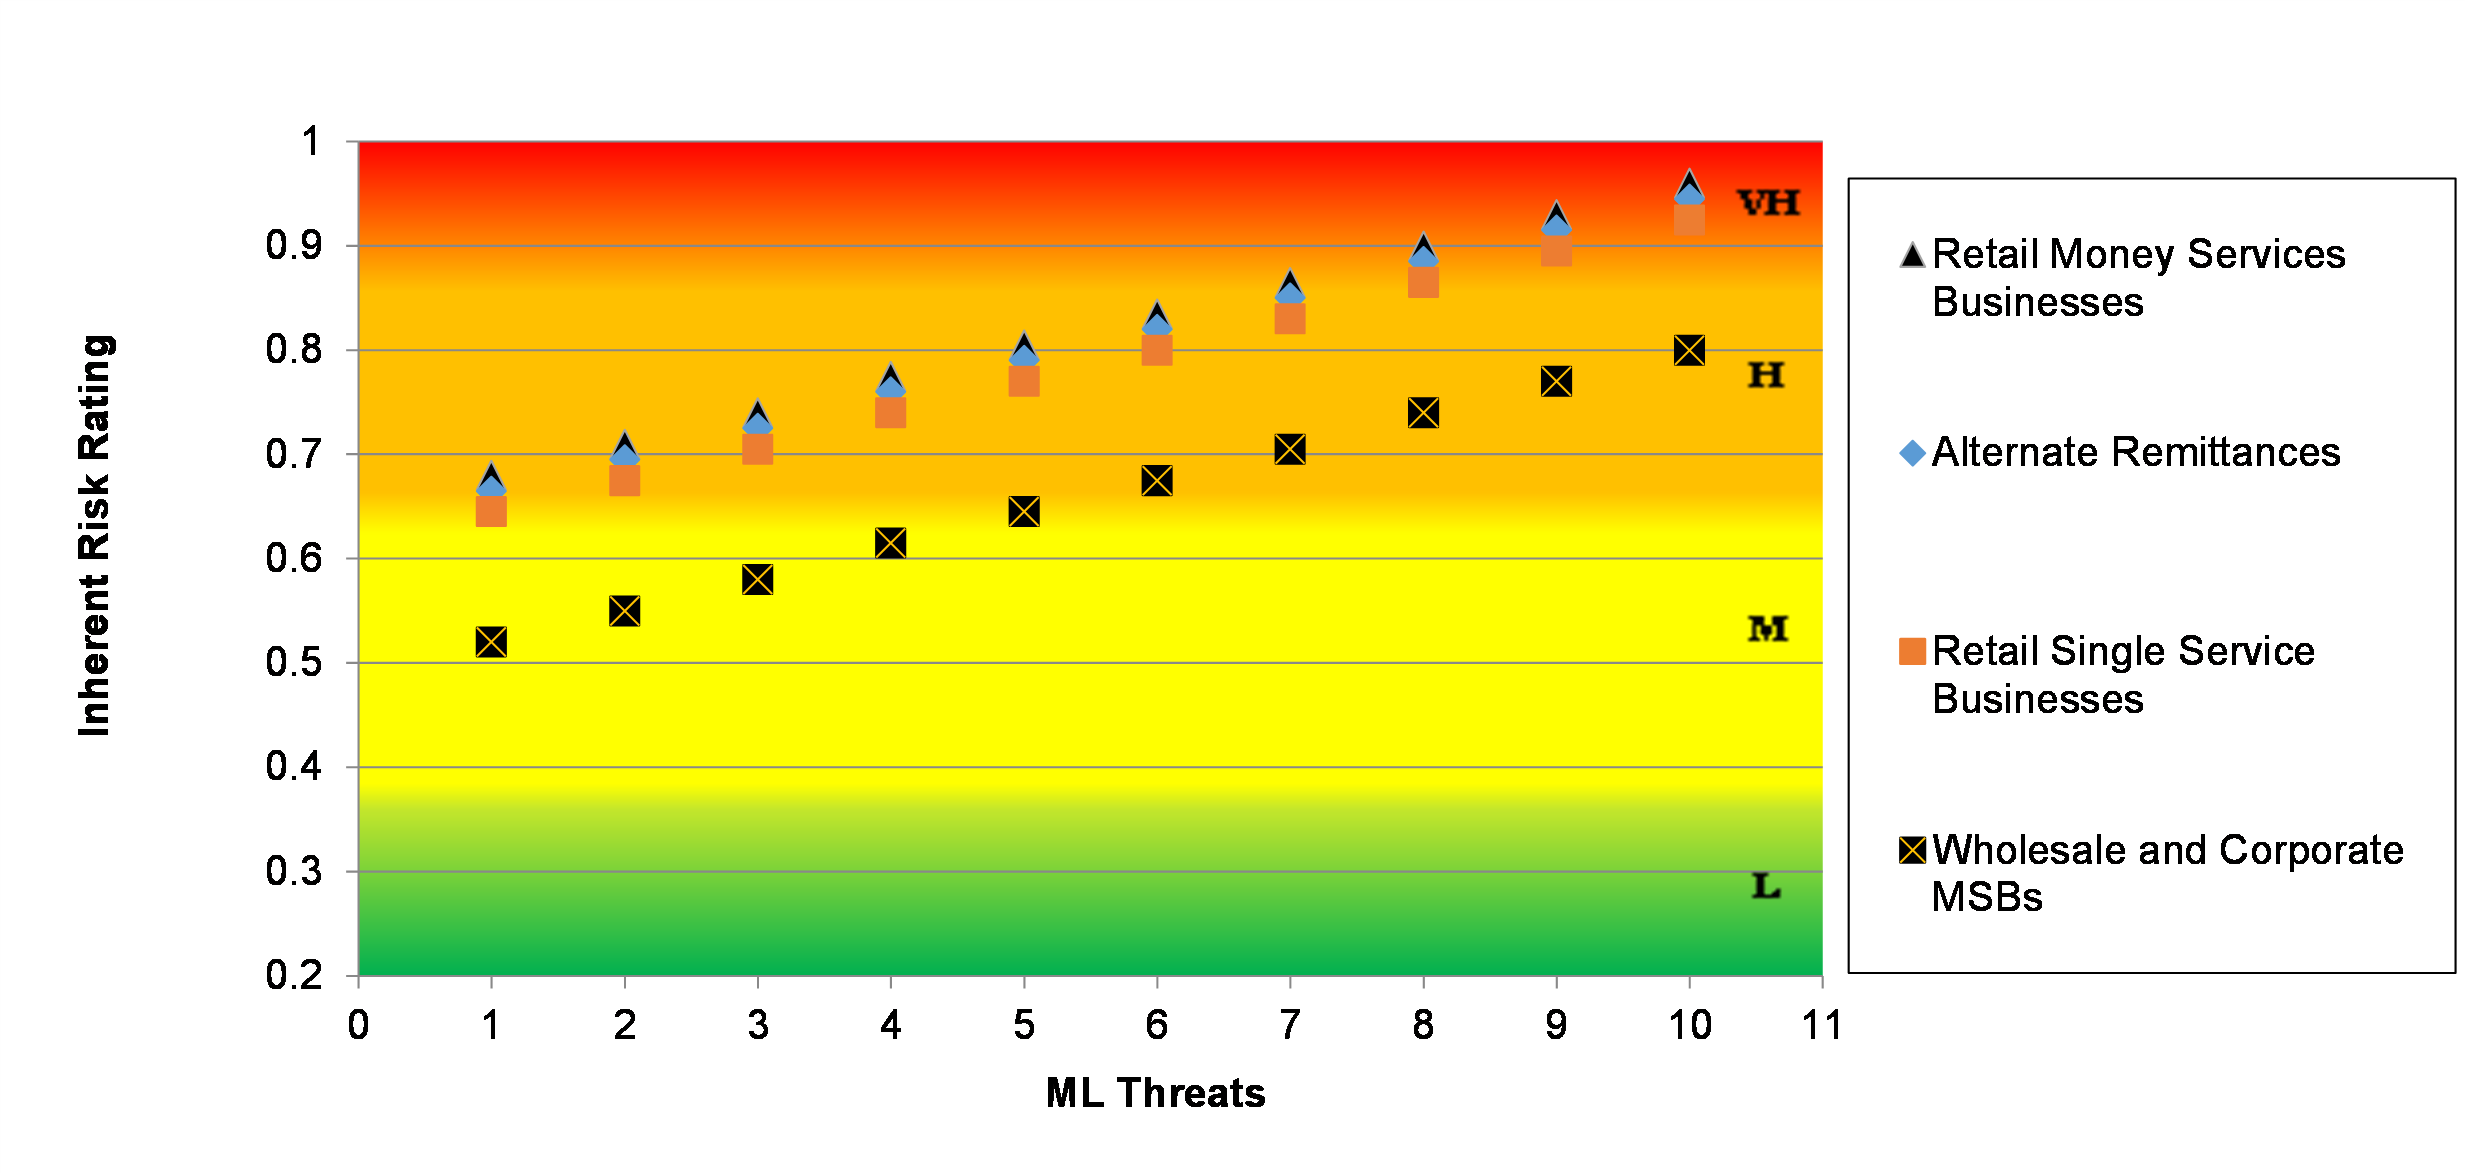 Figure 3: Inherent ML Risks in the Money Services Businesses Sector by Type of ML Threats